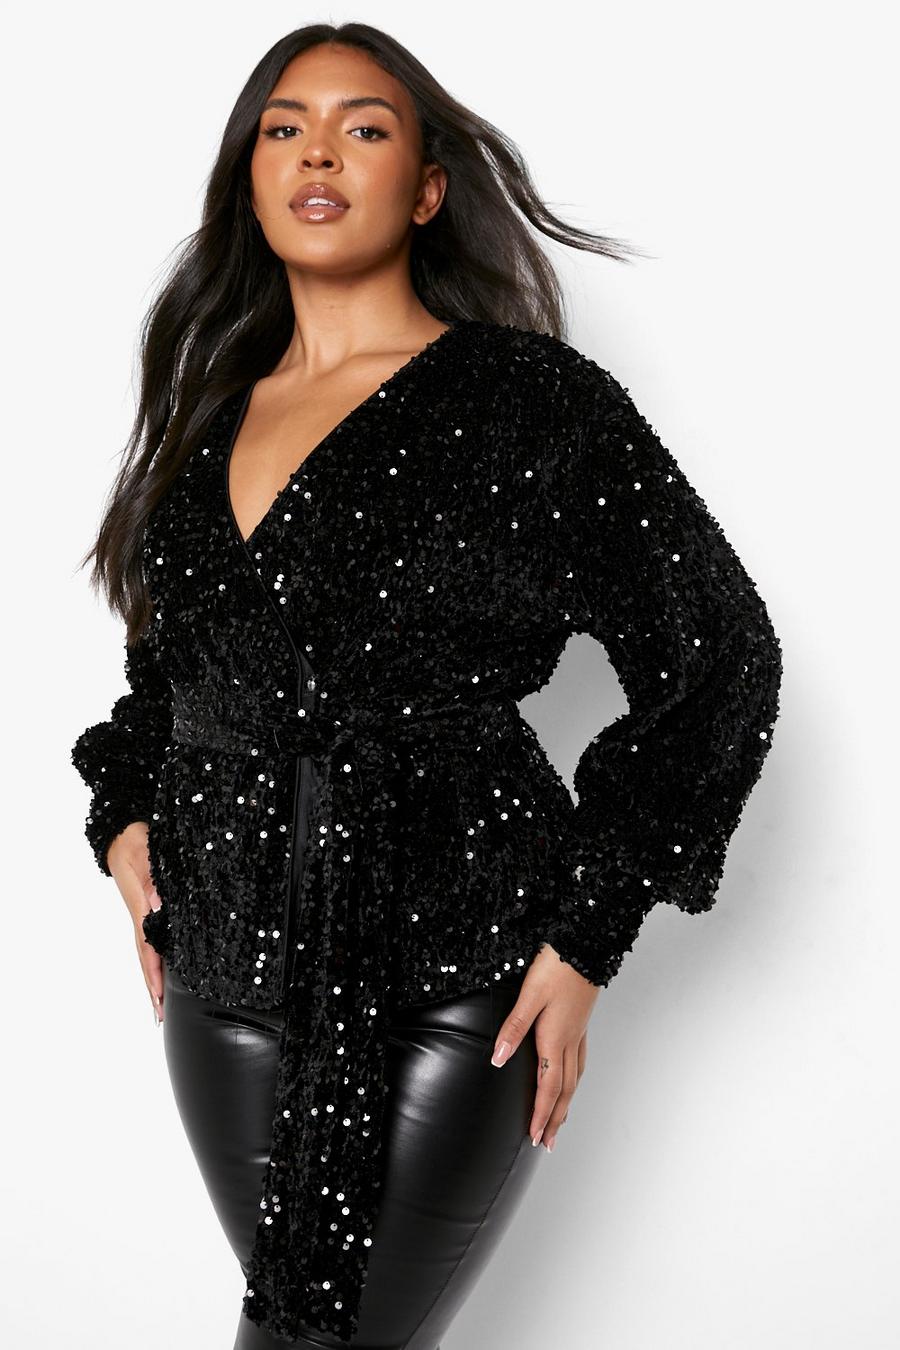 Plus Size Sequin Top And Skirt | vlr.eng.br